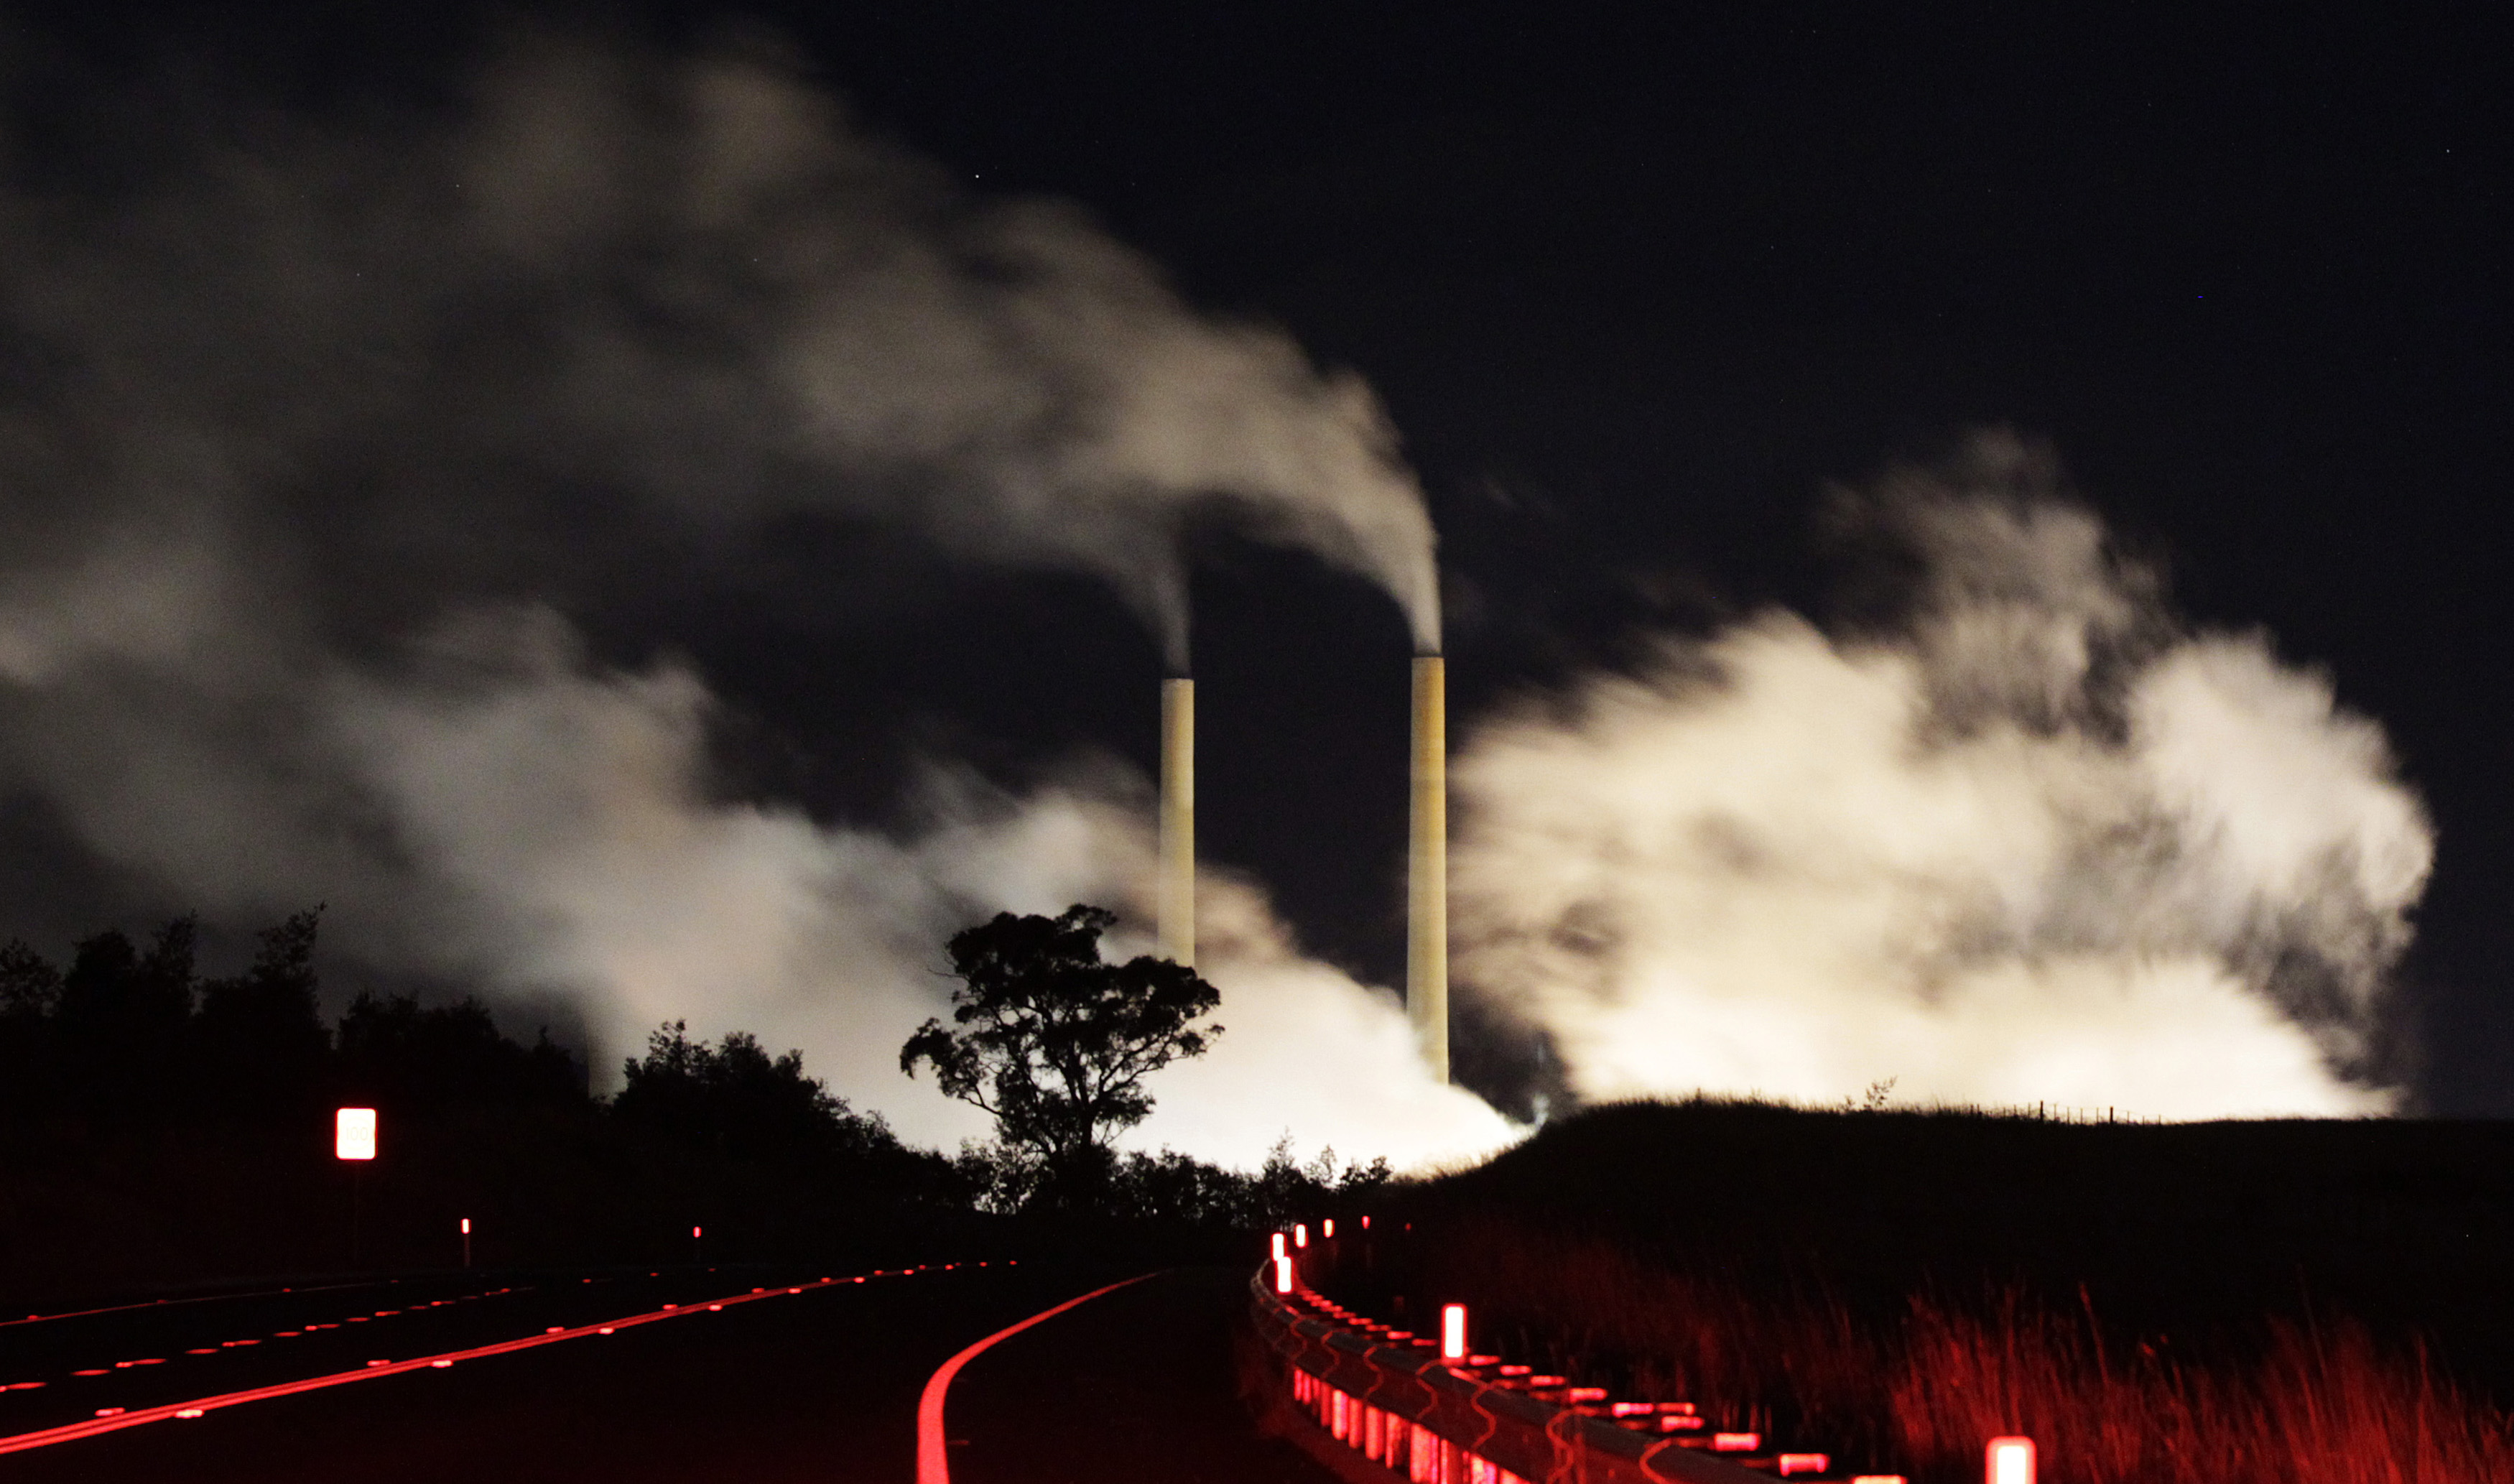 Steam and other emissions rise from a coal-fired power station near Lithgow, 120 km (75 miles) west of Sydney, July 7, 2011. REUTERS/Daniel Munoz